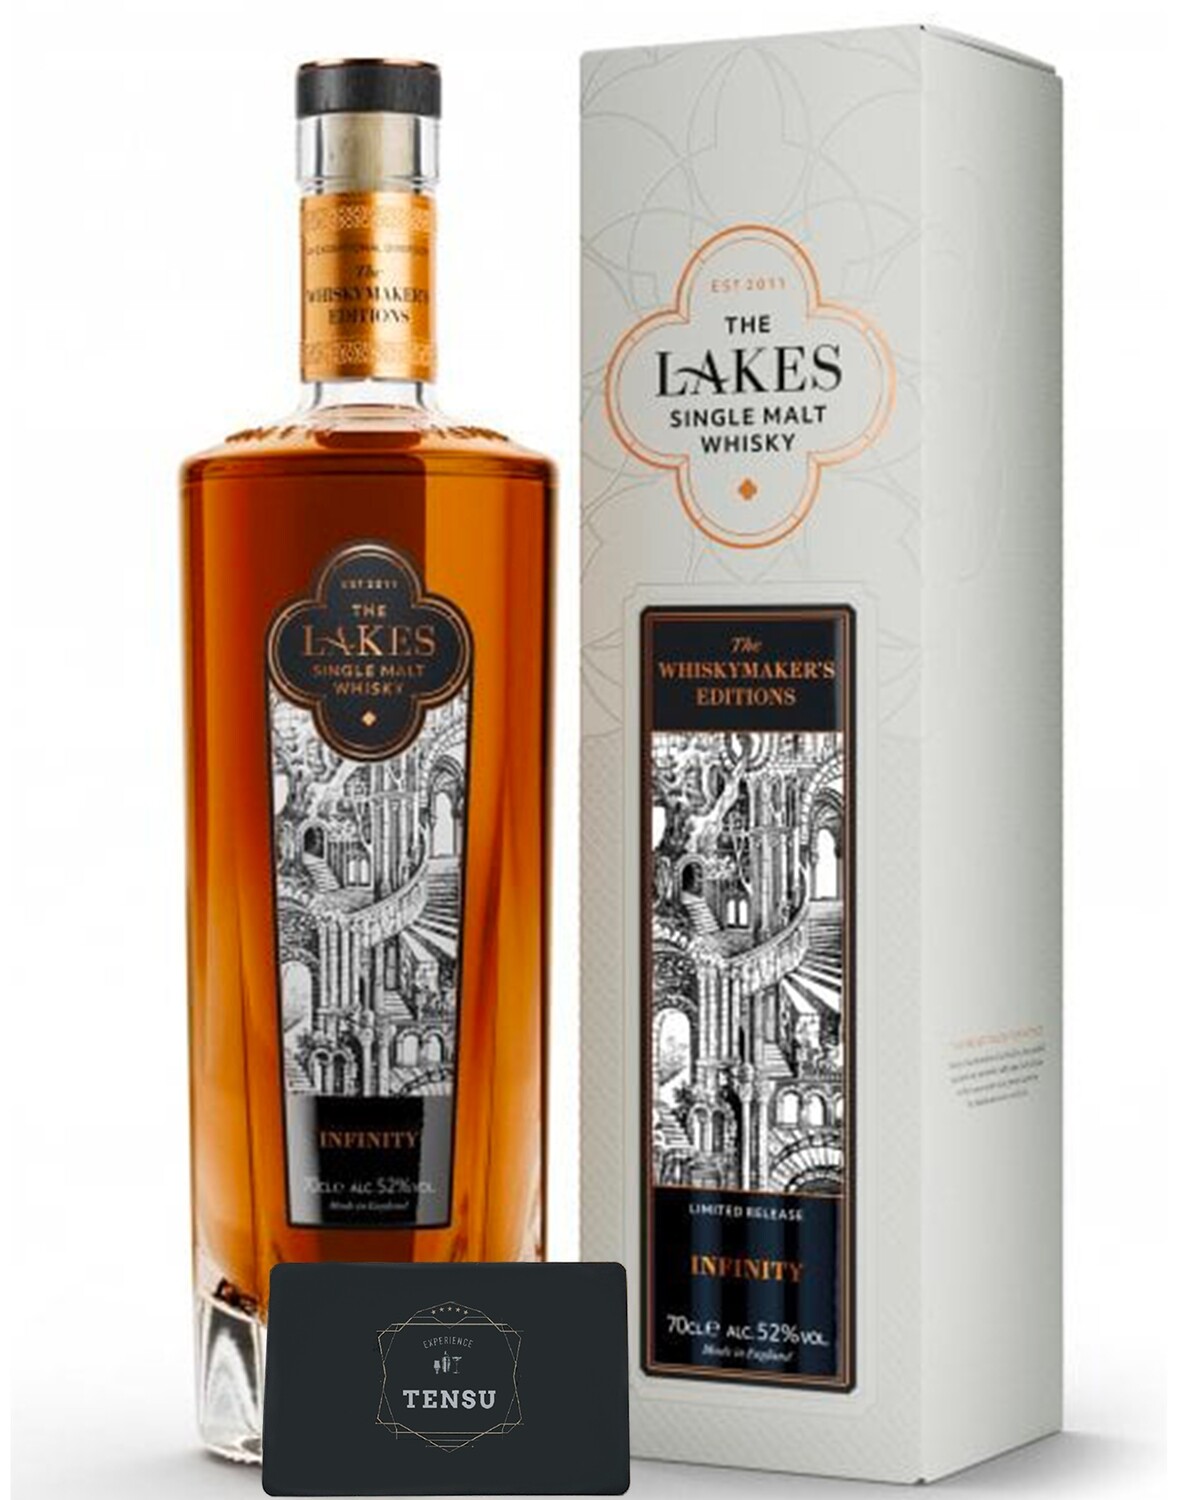 The Lakes - The Whiskymaker's Editions - Infinity 52.0 "The Lakes Distillery"